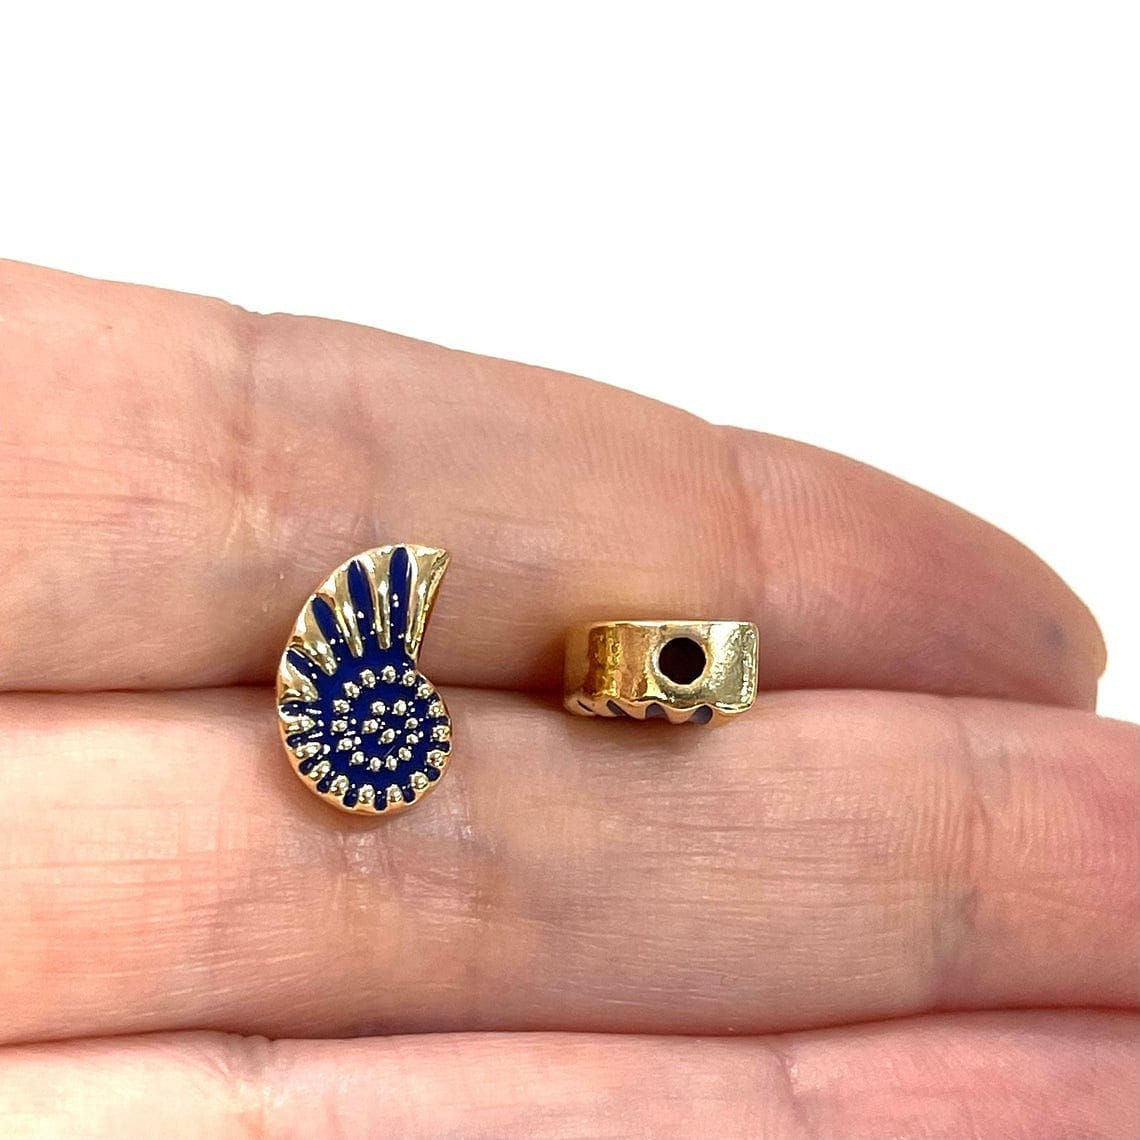 Gold Plated Enameled Single Sided Snail Spacer - Navy Blue